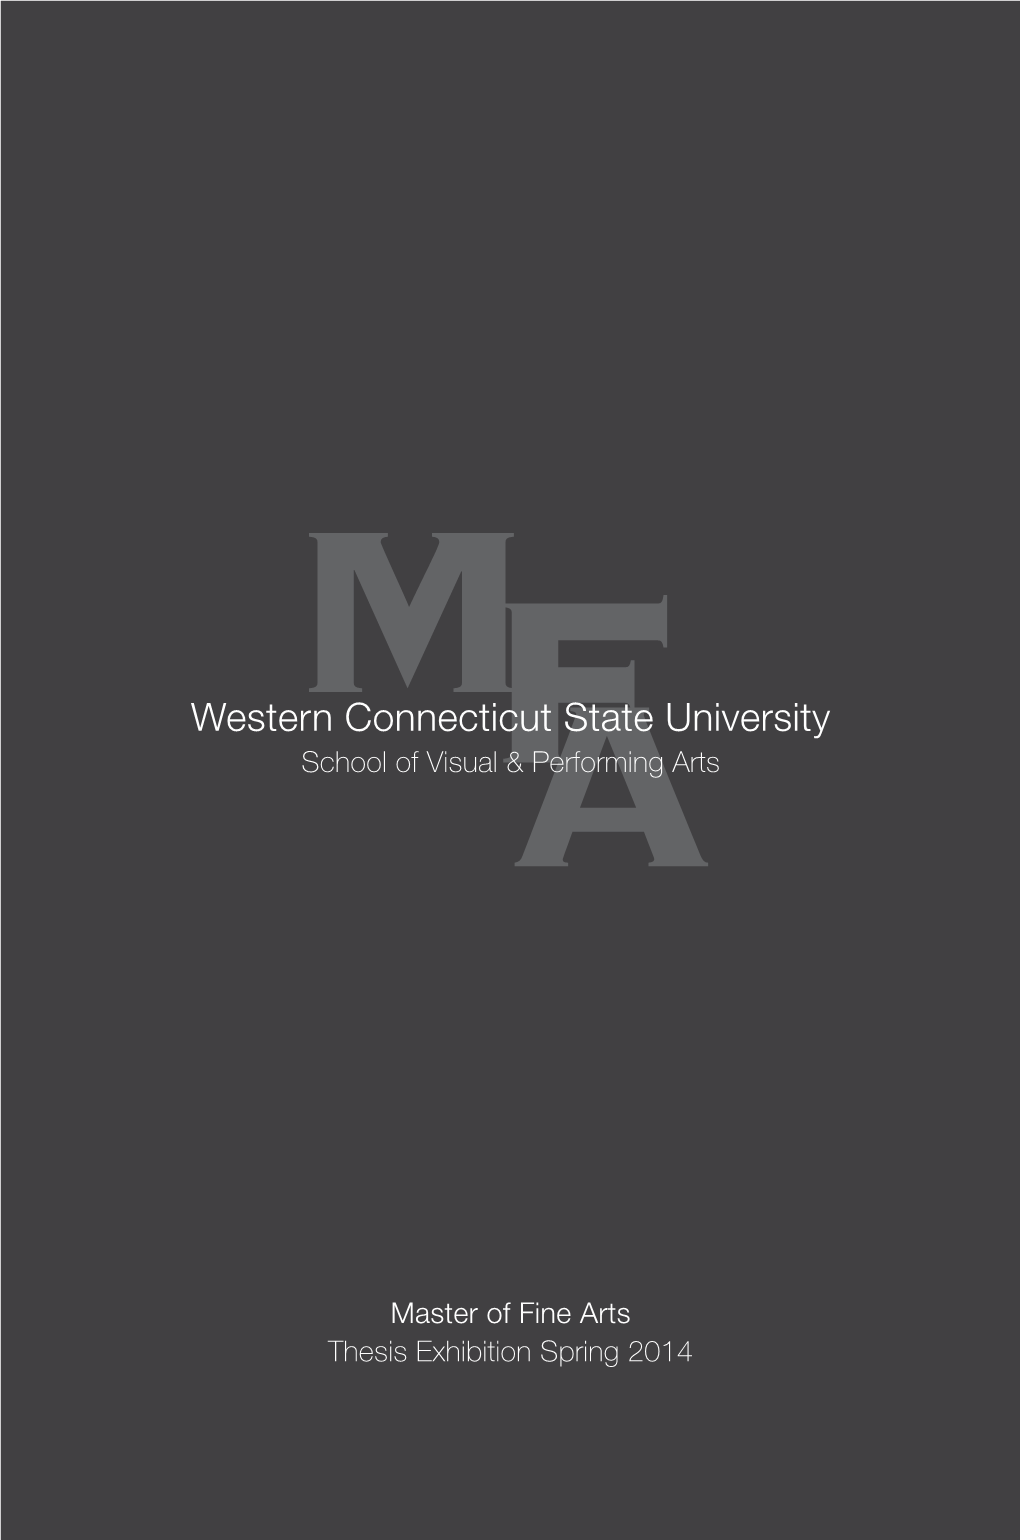 Western Connecticut State University School of Visual & Performing Arts